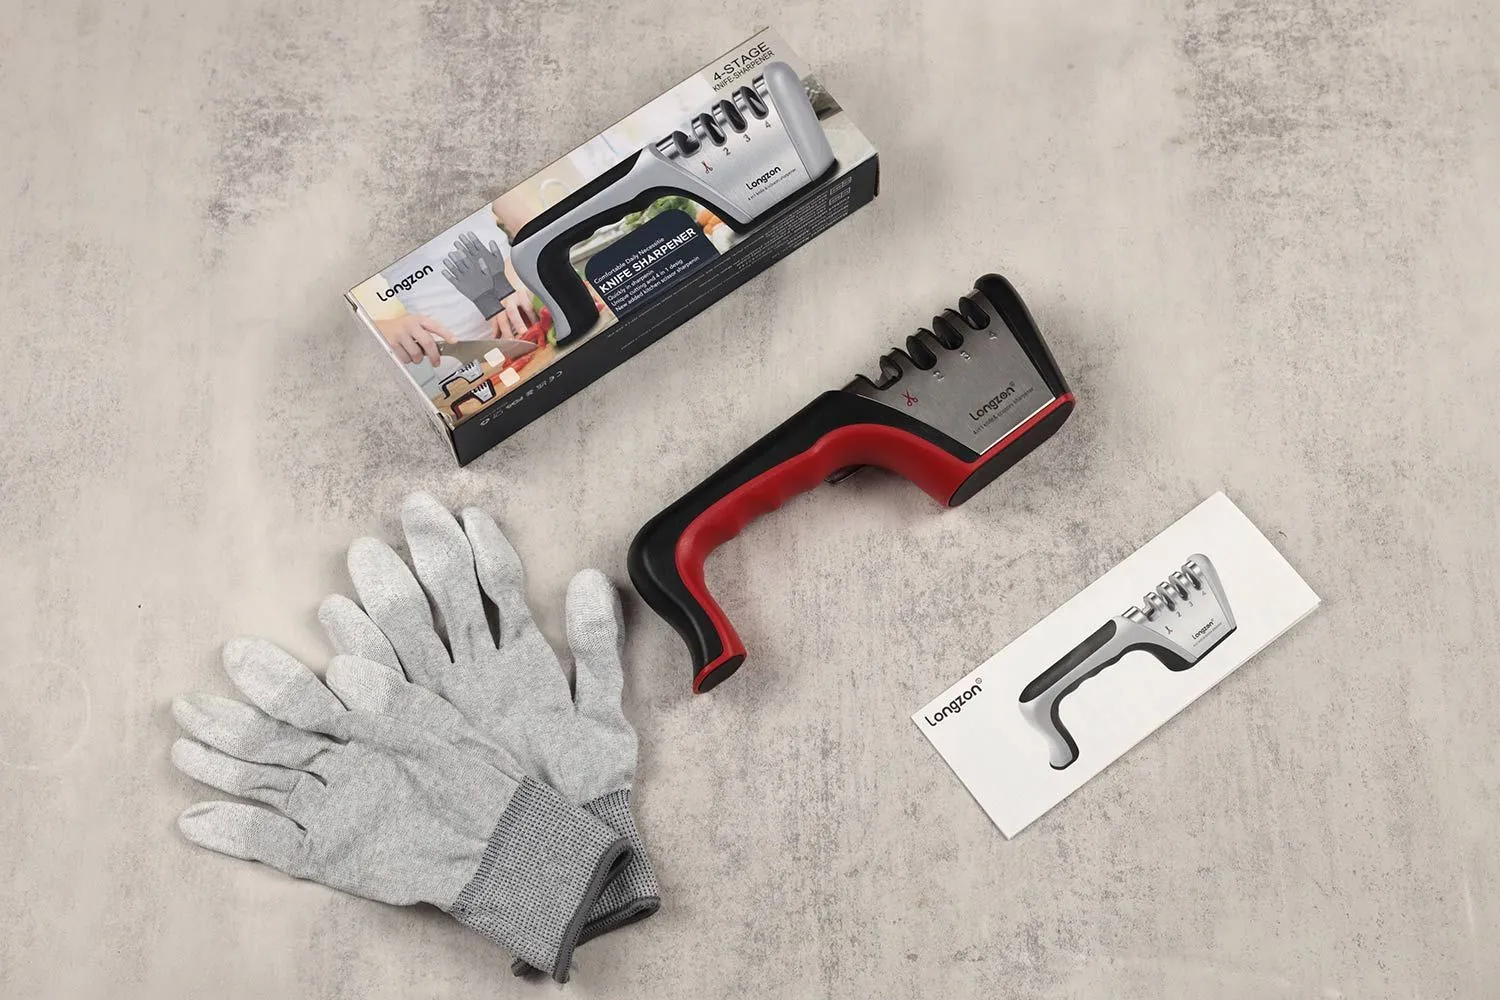 4-in-1 Longzon Knife Sharpener With A Pair Of Cut-resistant Glove